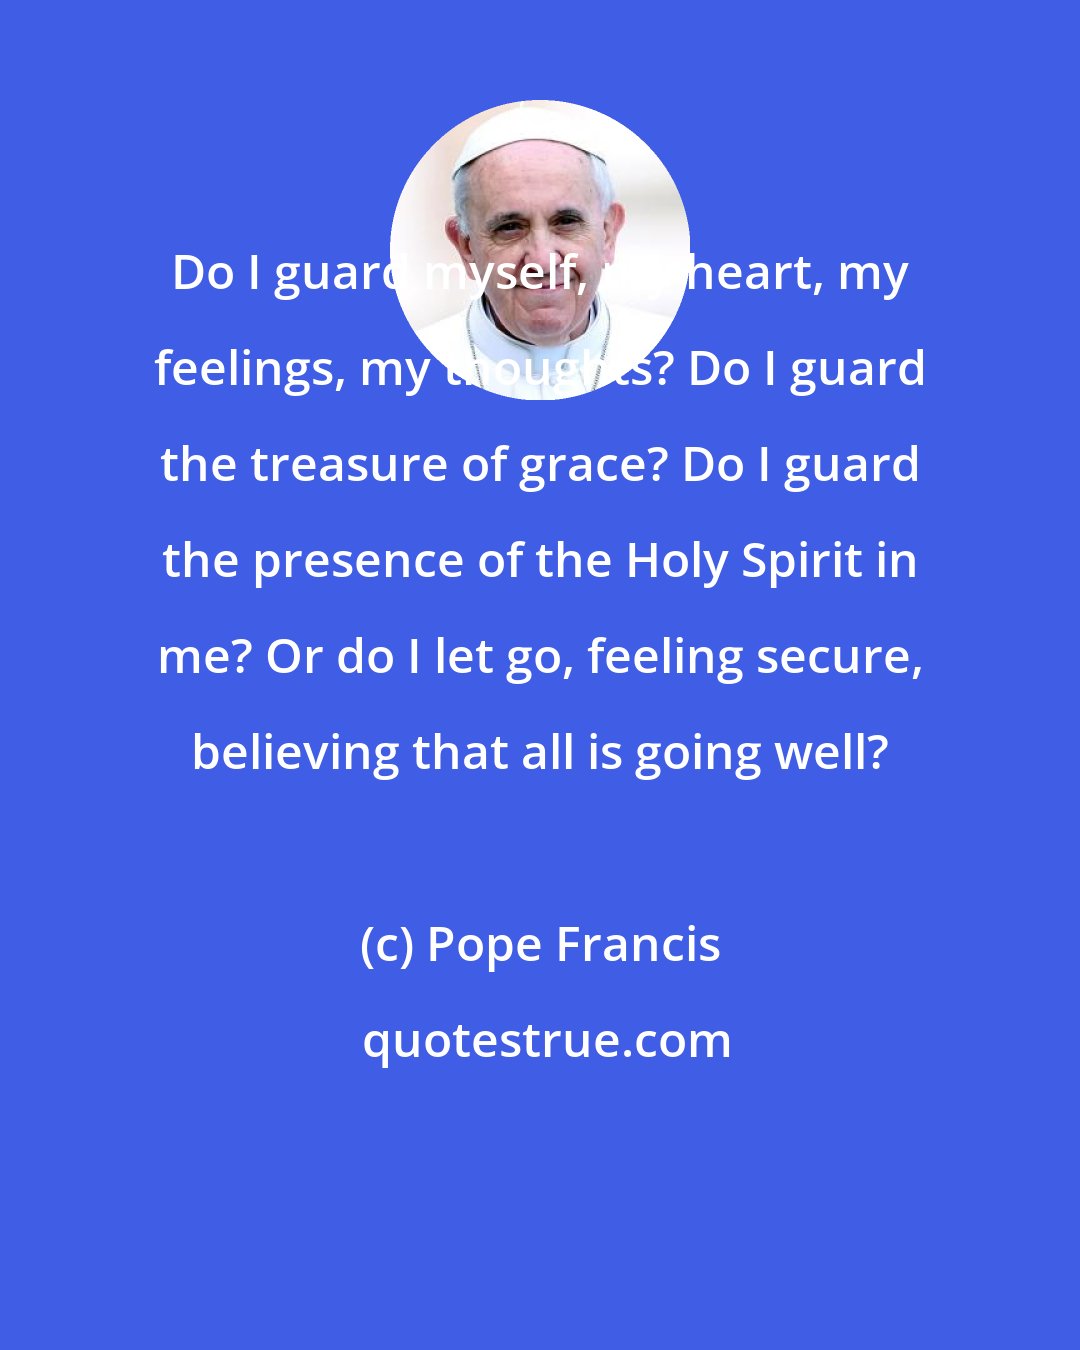 Pope Francis: Do I guard myself, my heart, my feelings, my thoughts? Do I guard the treasure of grace? Do I guard the presence of the Holy Spirit in me? Or do I let go, feeling secure, believing that all is going well?